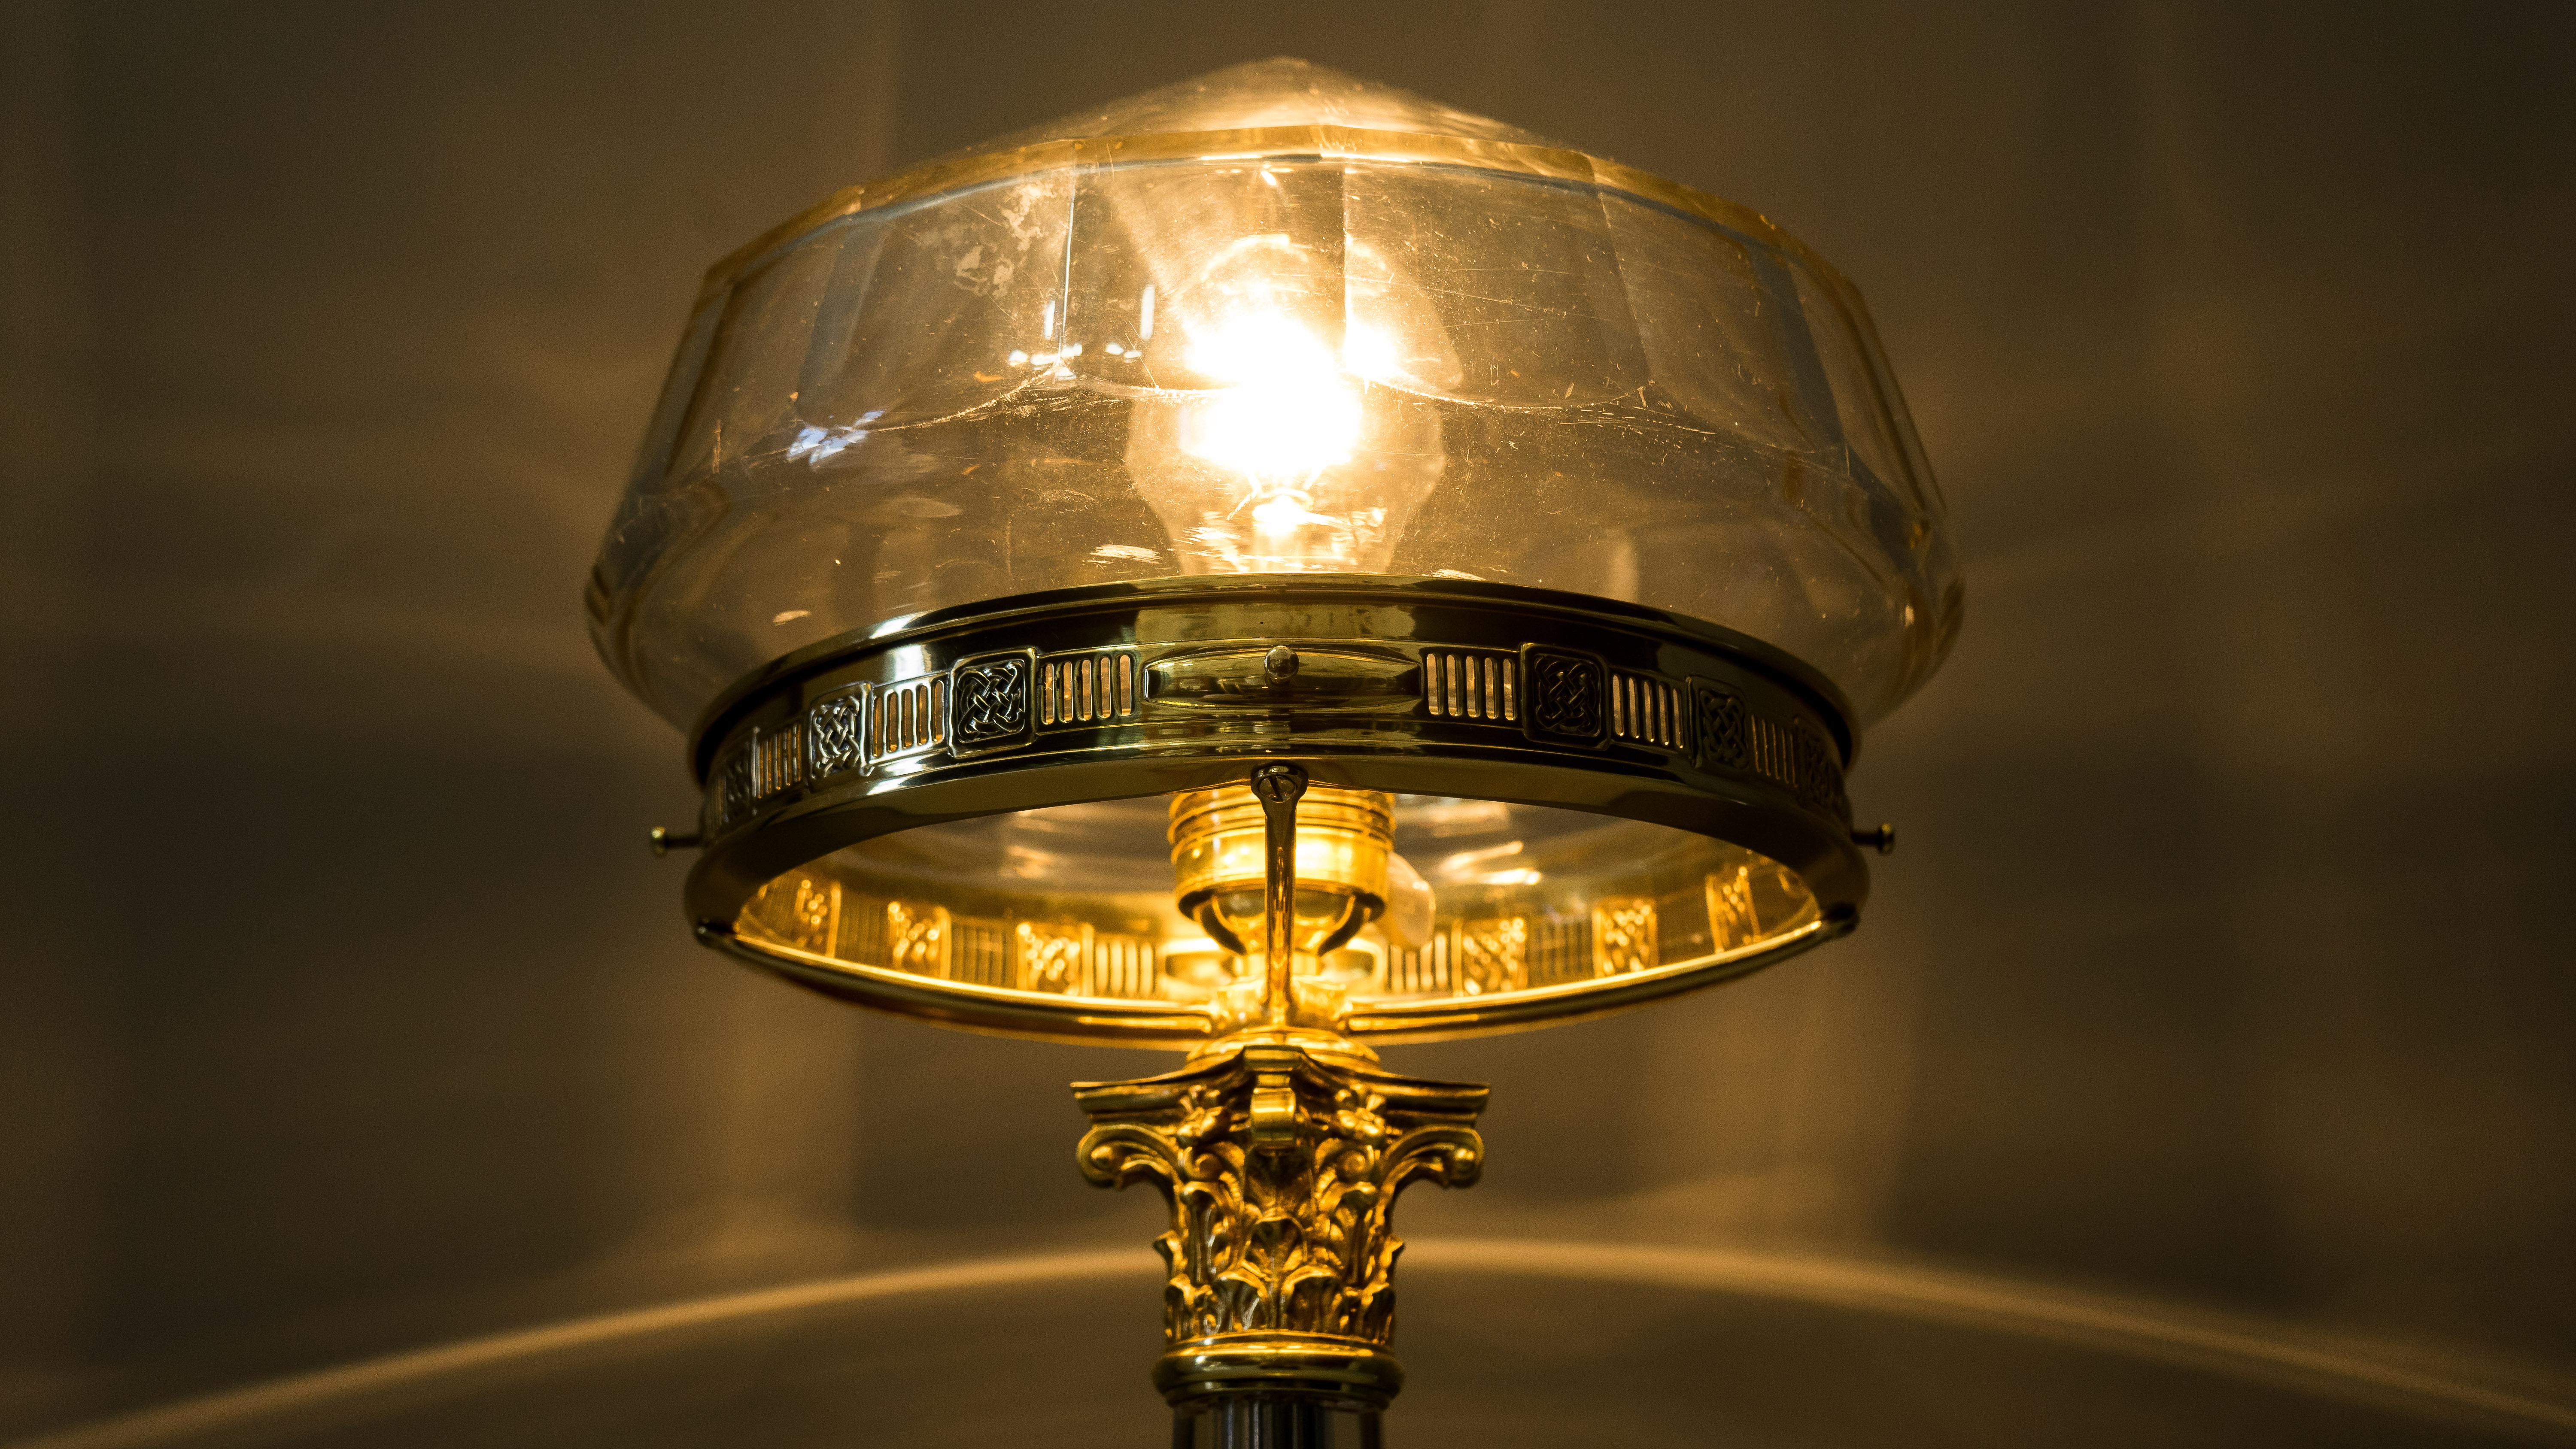 Big Jugendstil Table Lamp with Cut Glass Shade, Vienna, 1908s For Sale 3